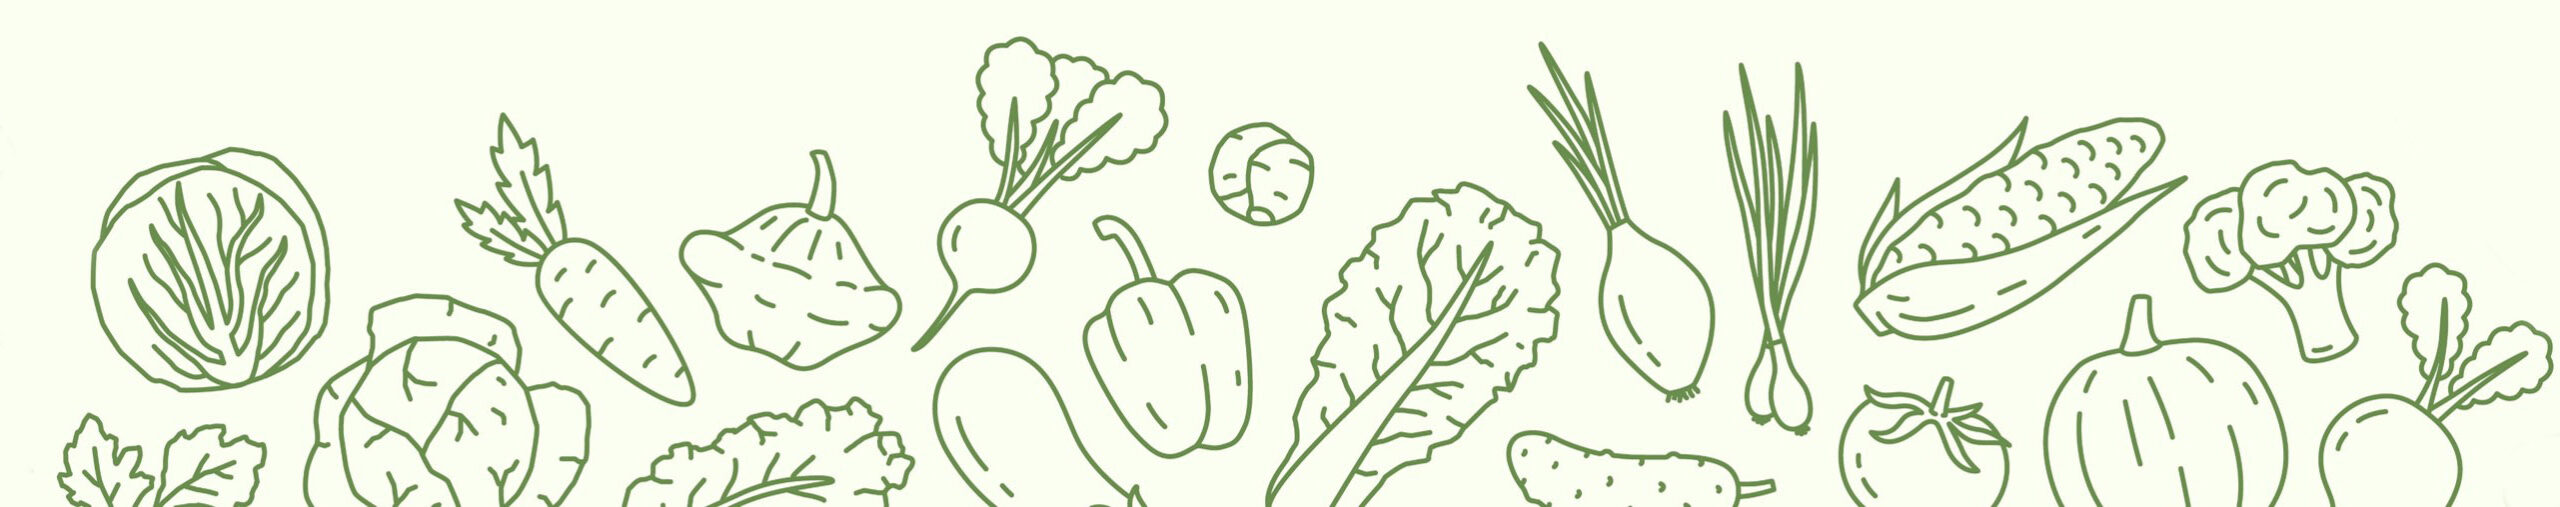 banner with image of vegetables